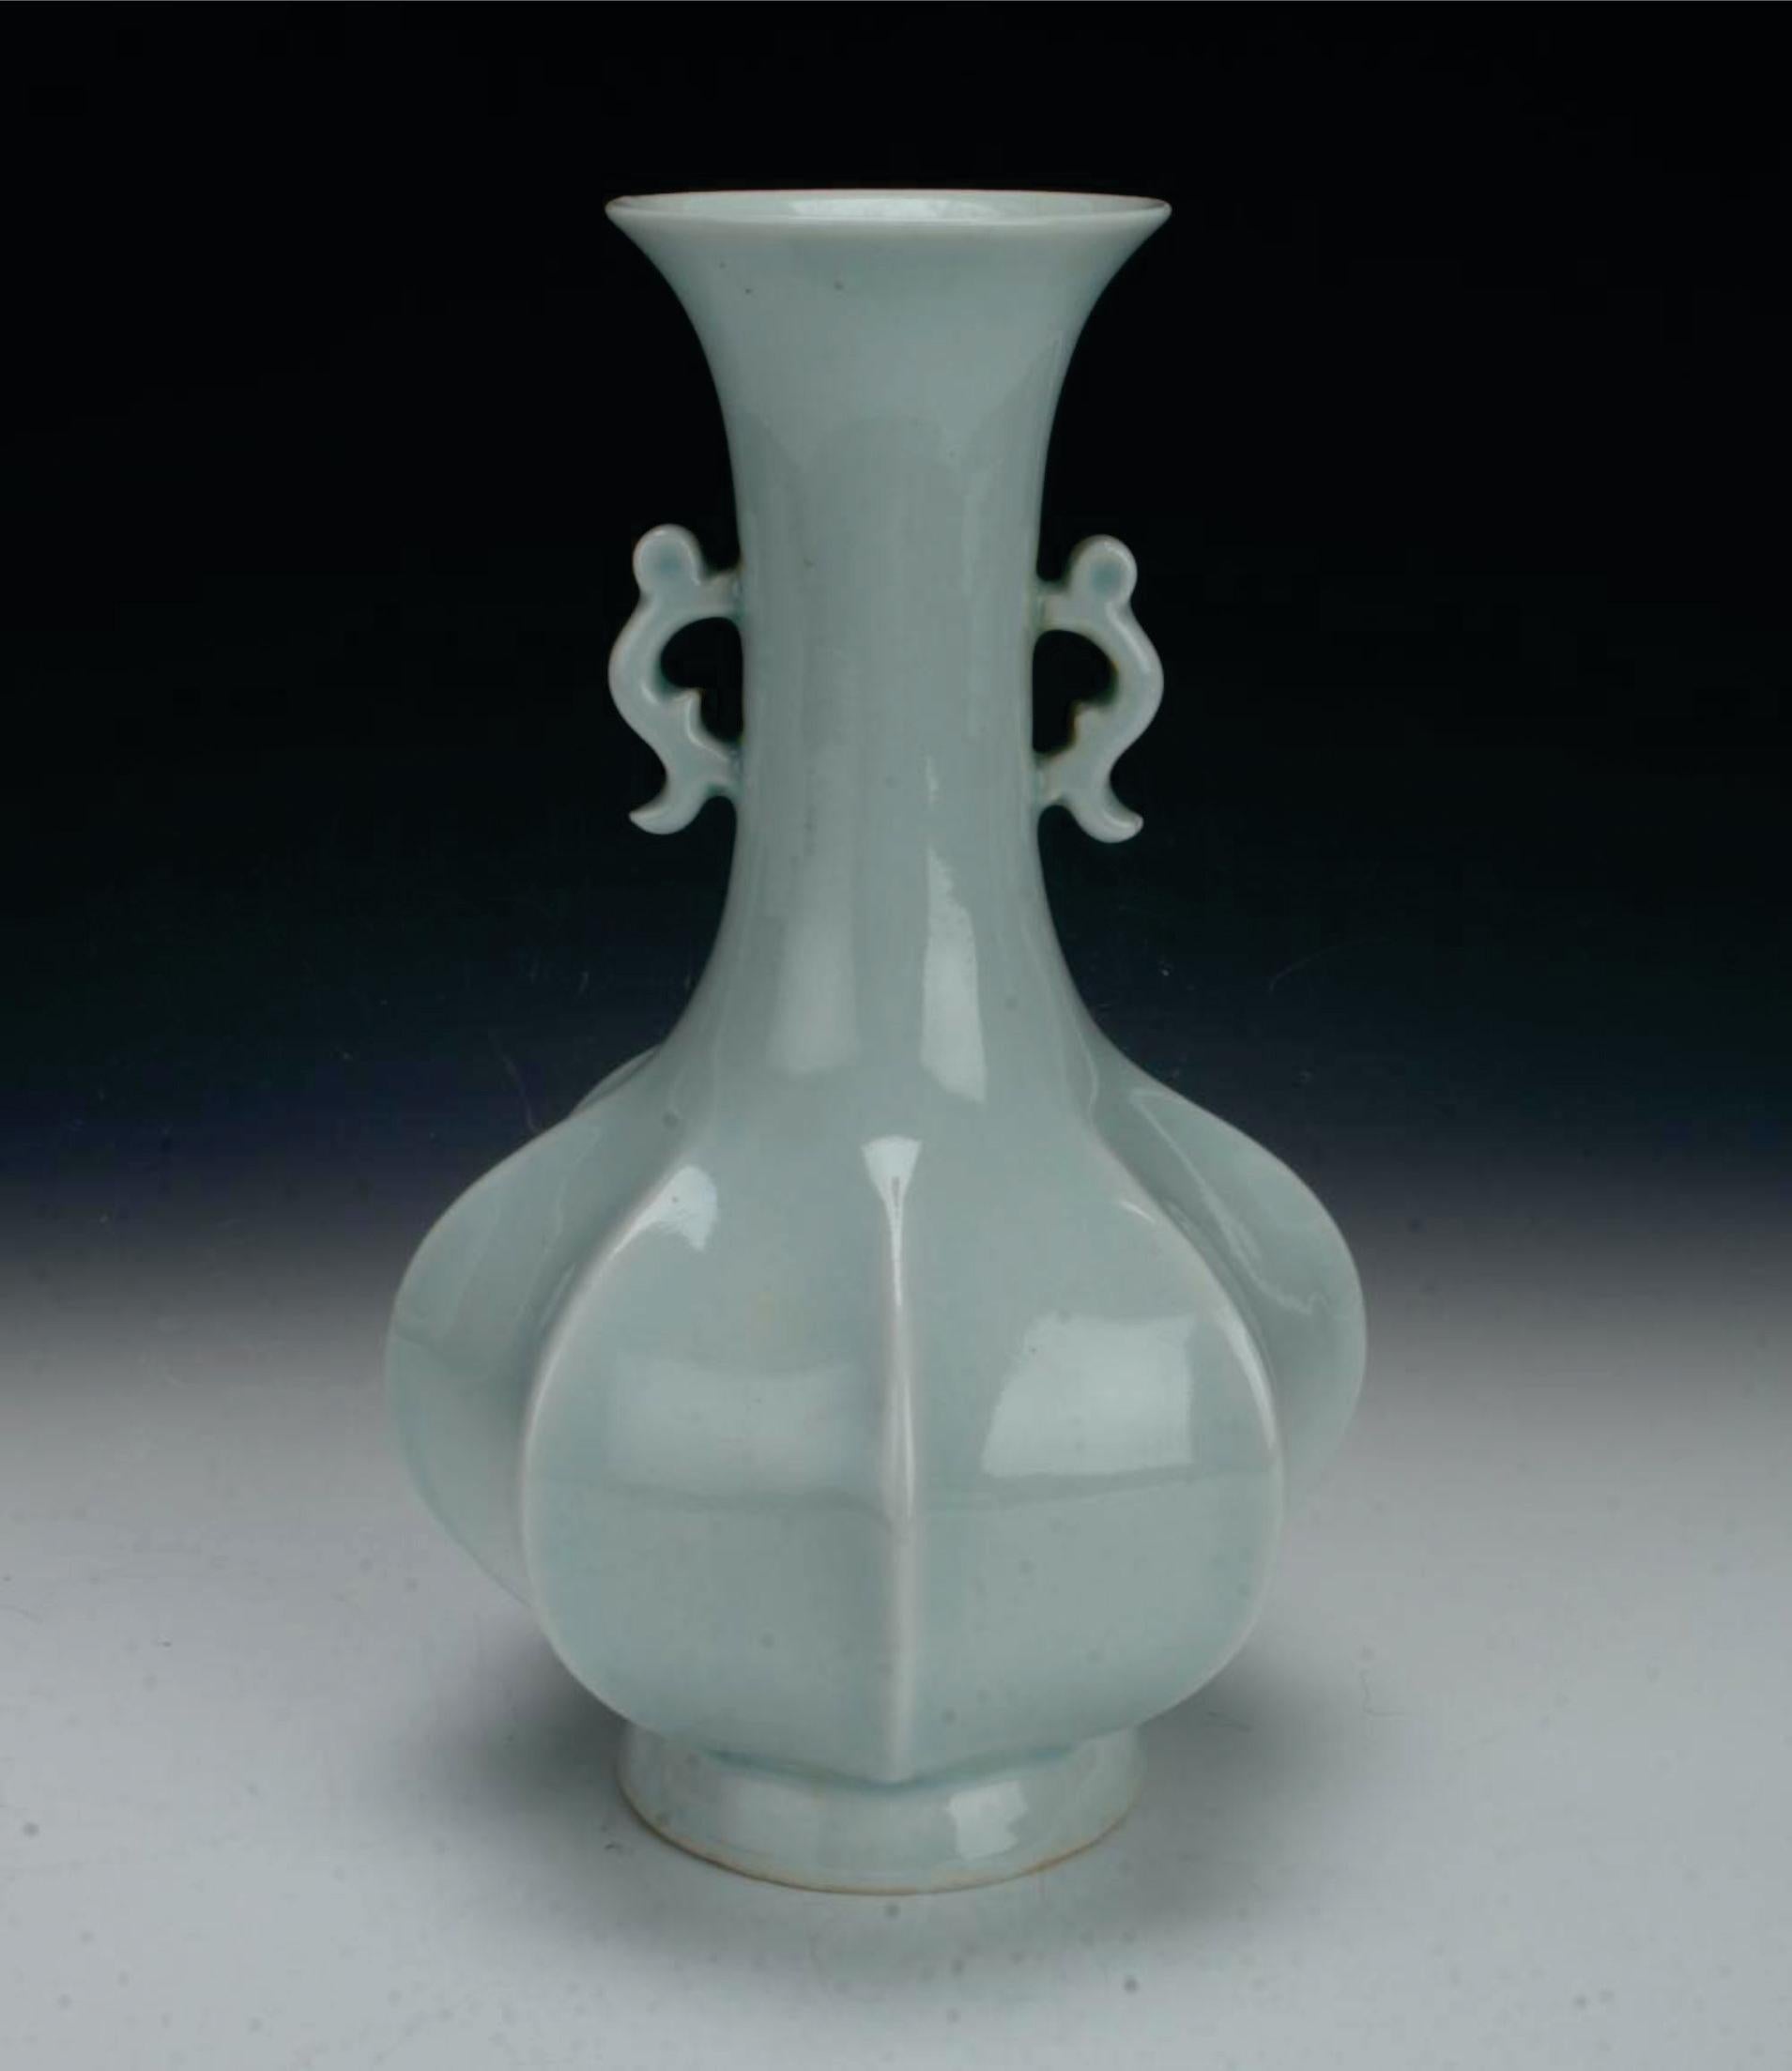 A very usual and delicate hand-crafted shape of Lobed celadon vase with pierced dragon handles on the neck, very thin and light in the body, unglazed bottom.
  